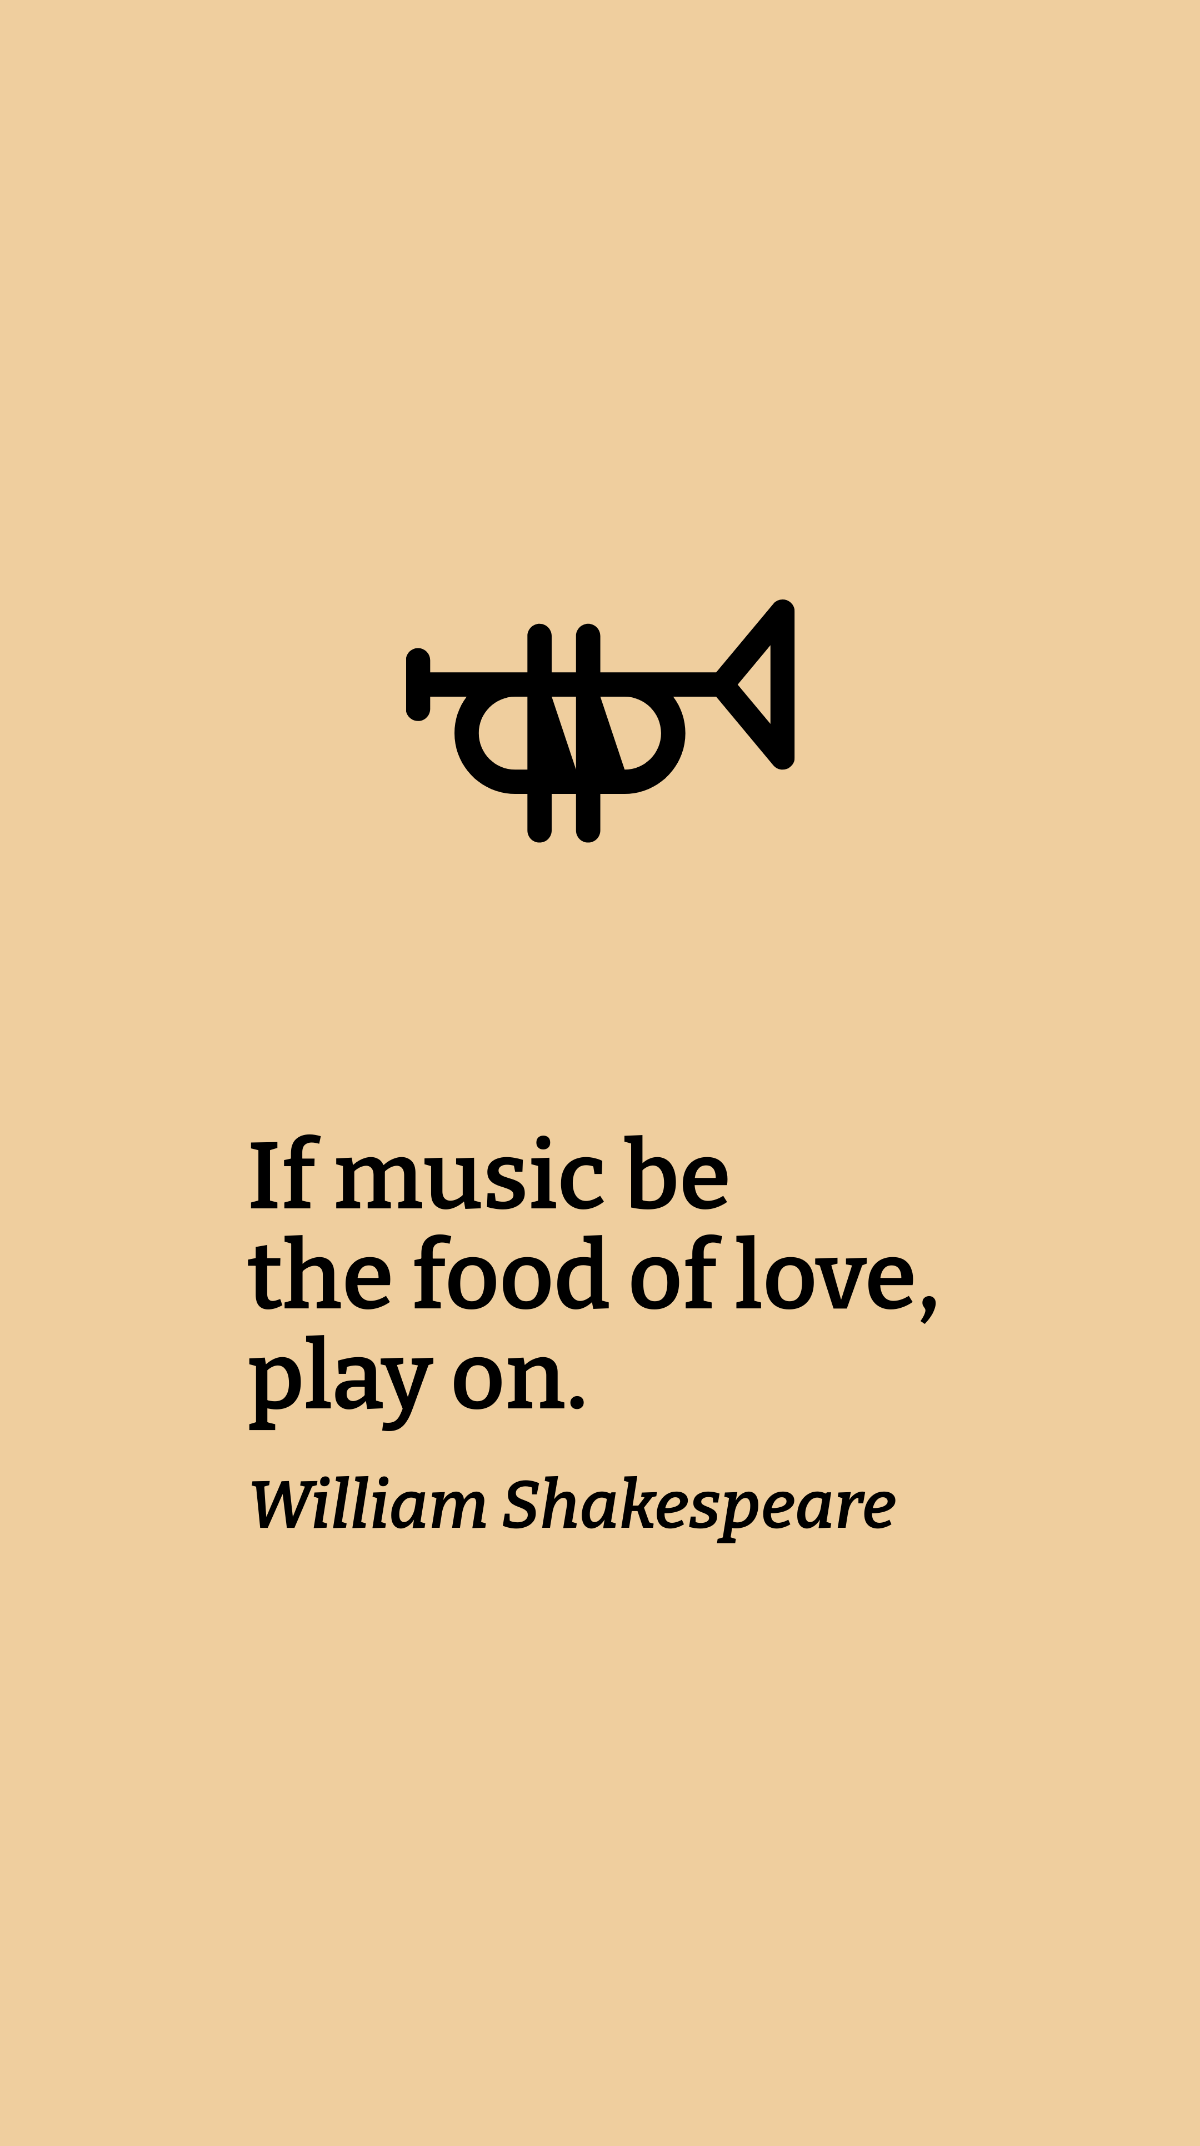 William Shakespeare - If music be the food of love, play on.